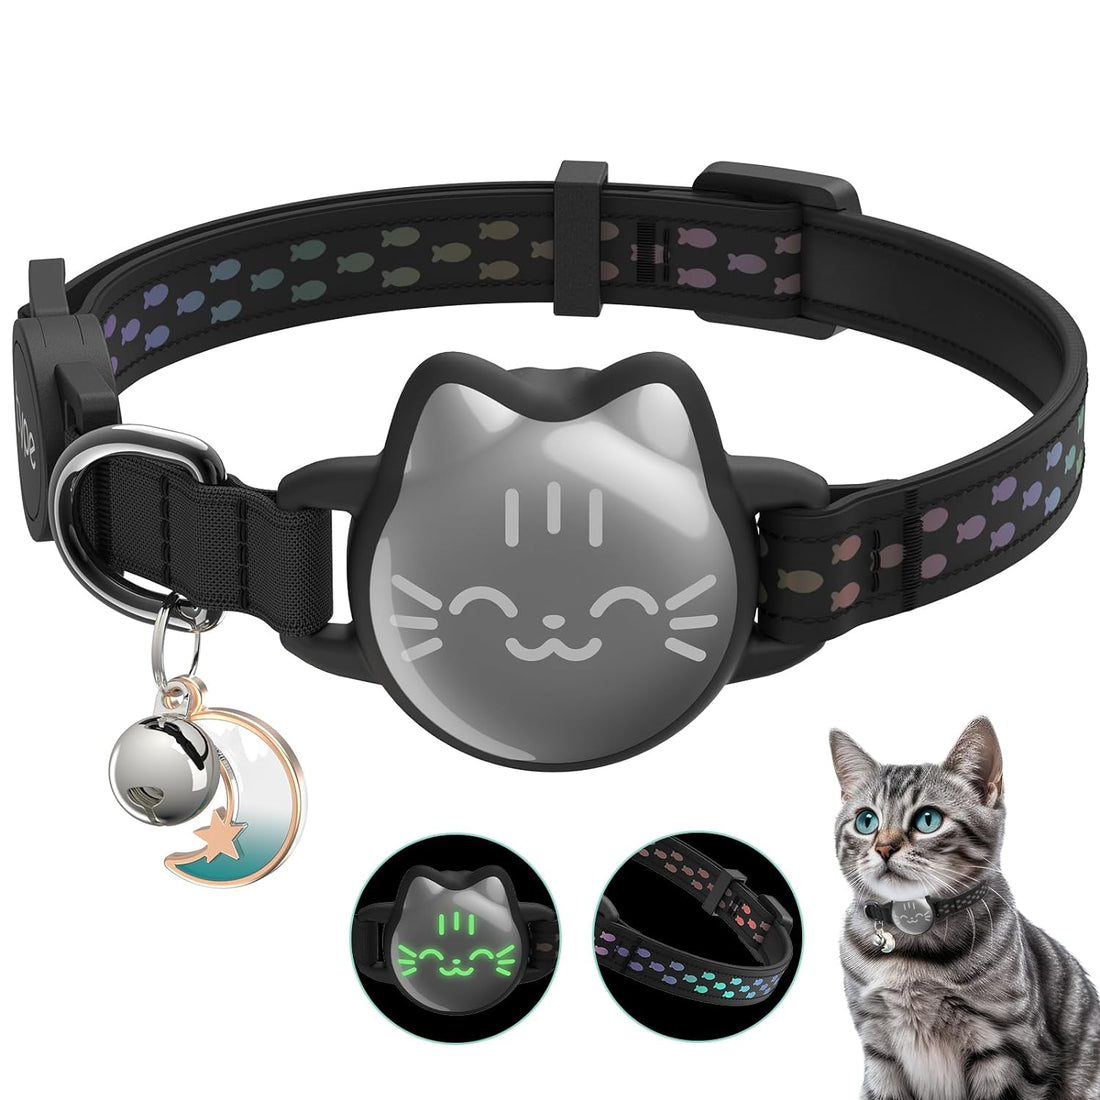 Waterproof Airtag Cat Collar, Breakaway Cat Airtag Collar with Luminous & Reflective Fish Pattern, Lightweight Kitten Collar for Apple Air tag, Hidden GPS Tracker Holder for Cats, Kittens(9-13")